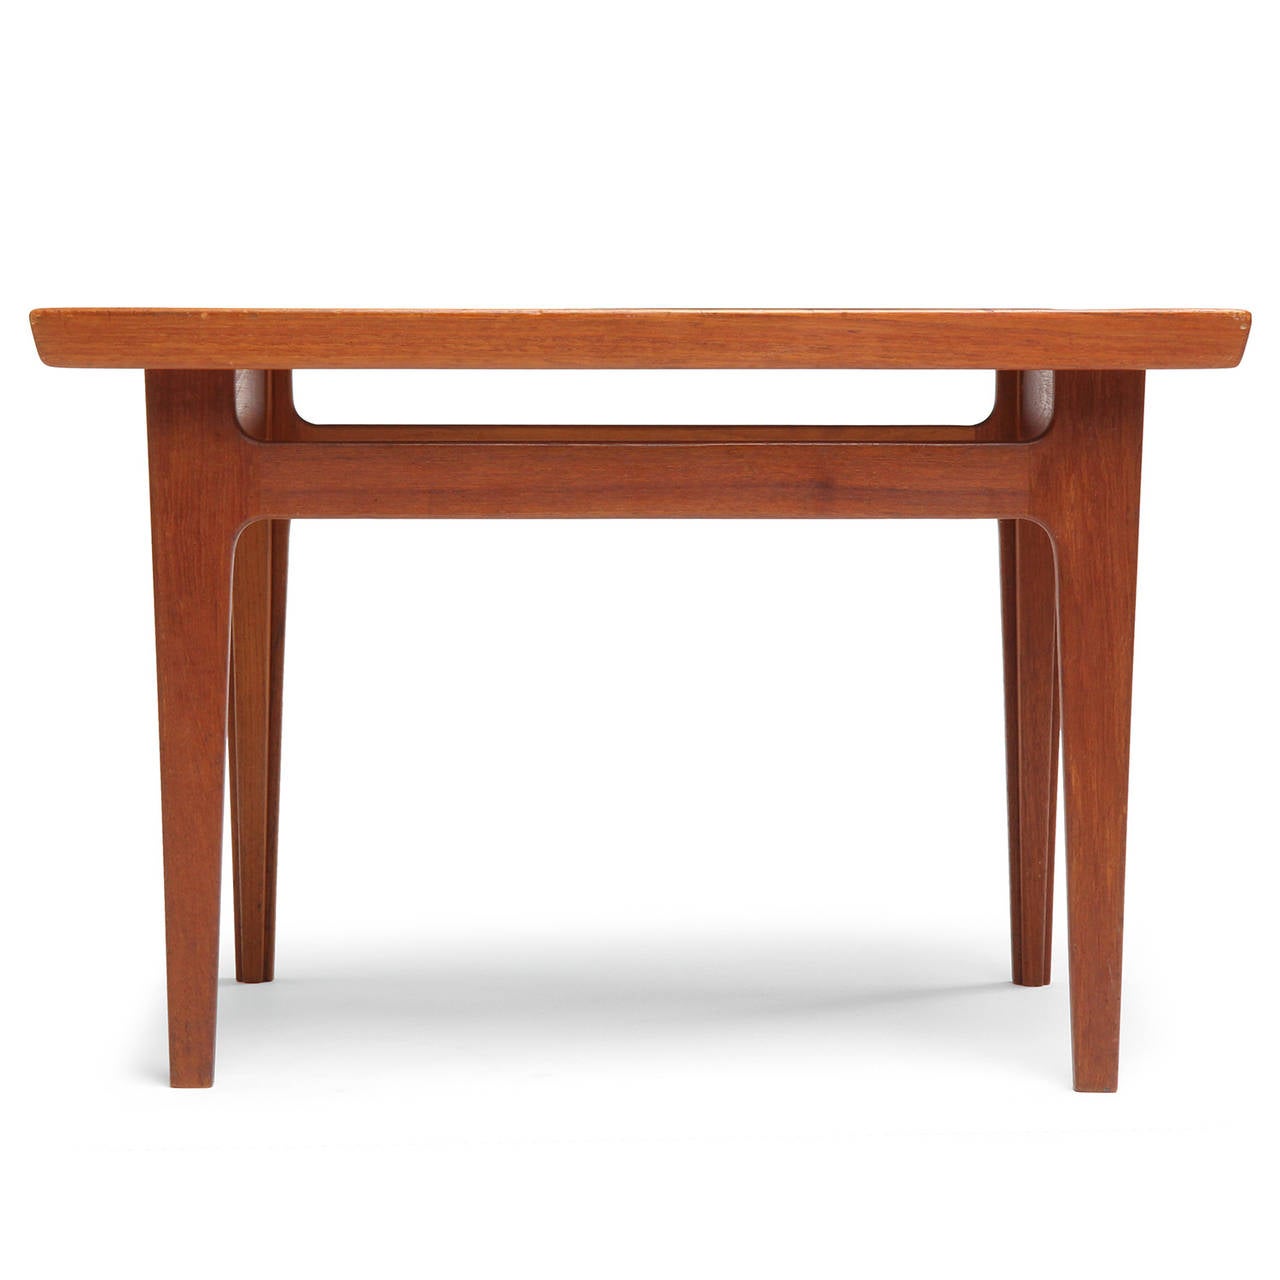 A refined and architectural Scandinavian modern occasional table designed by Finn Juhl for France & Son. Crafted from a warm teak and features a raised edged top and tapered legs. Produced in Denmark, circa 1960s.

Finn Juhl was first and foremost